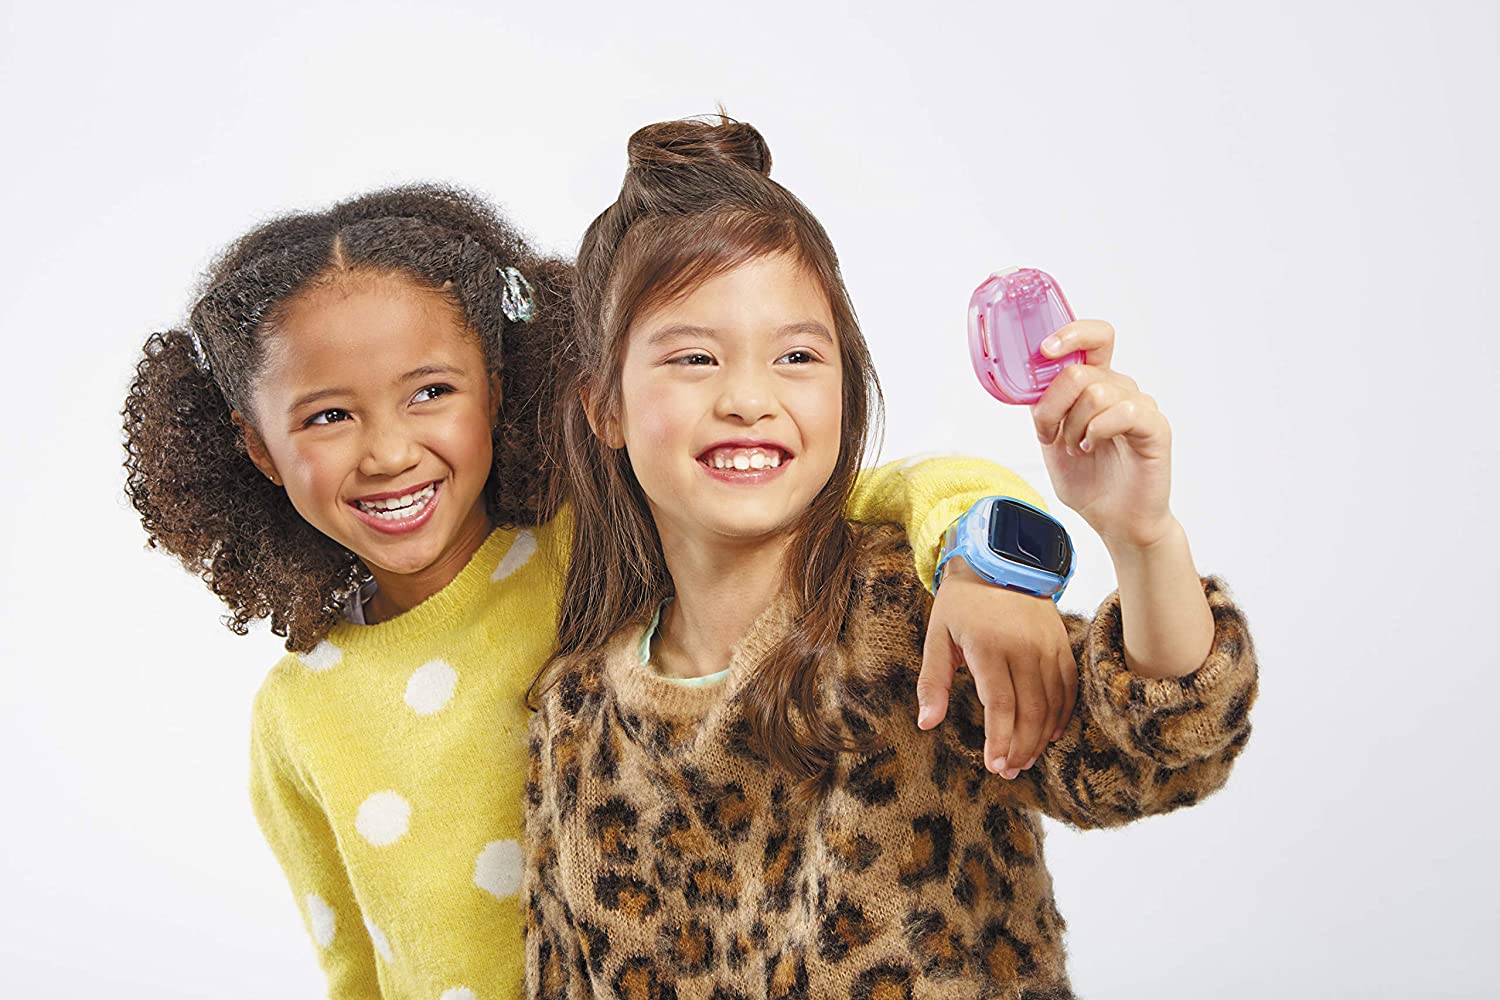 The 4 Best Smartwatches and Phones for Kids of 2023